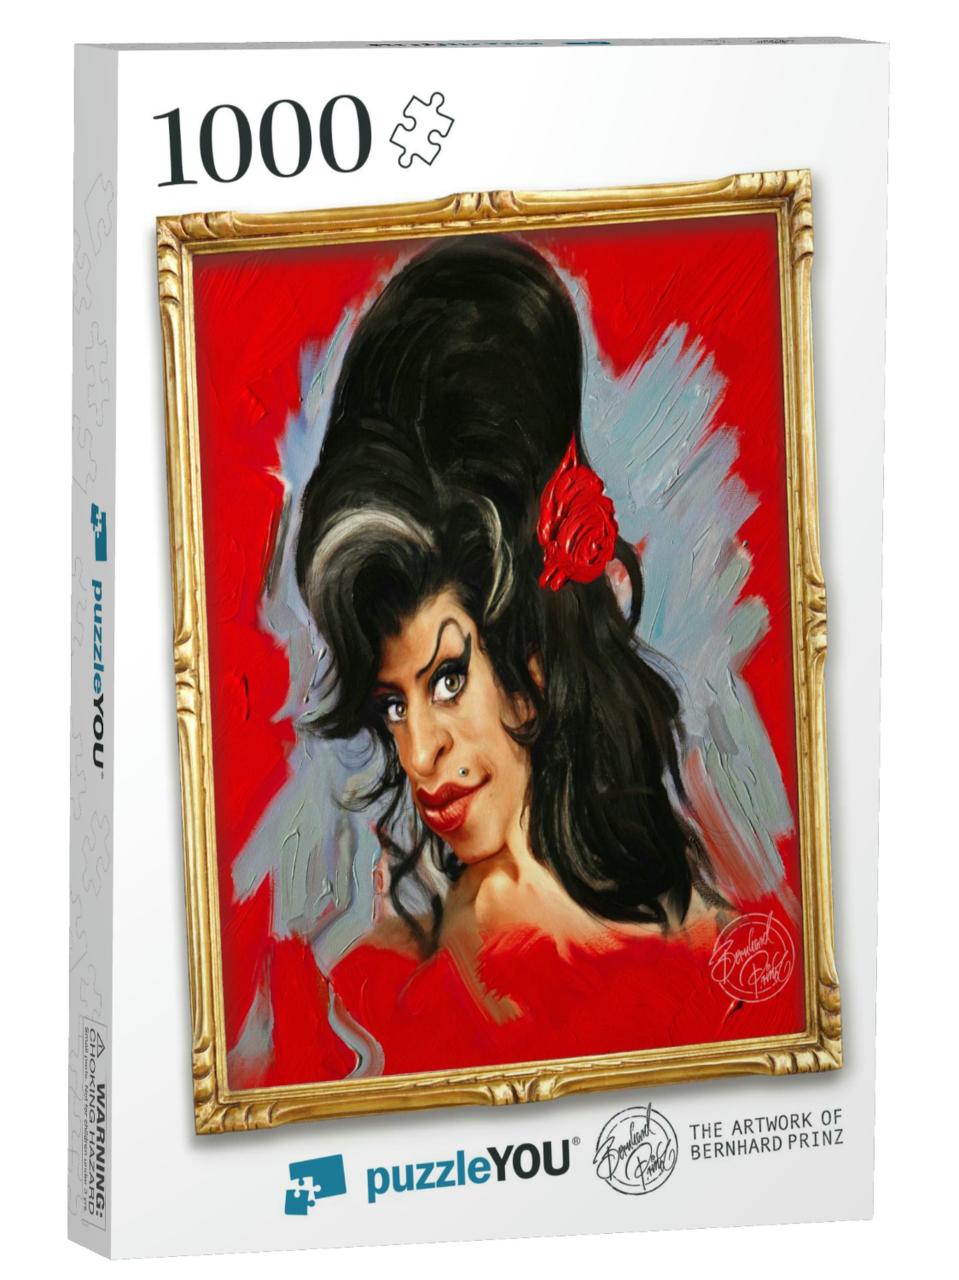 Beehive Hair Singer Portrait Jigsaw Puzzle with 1000 pieces